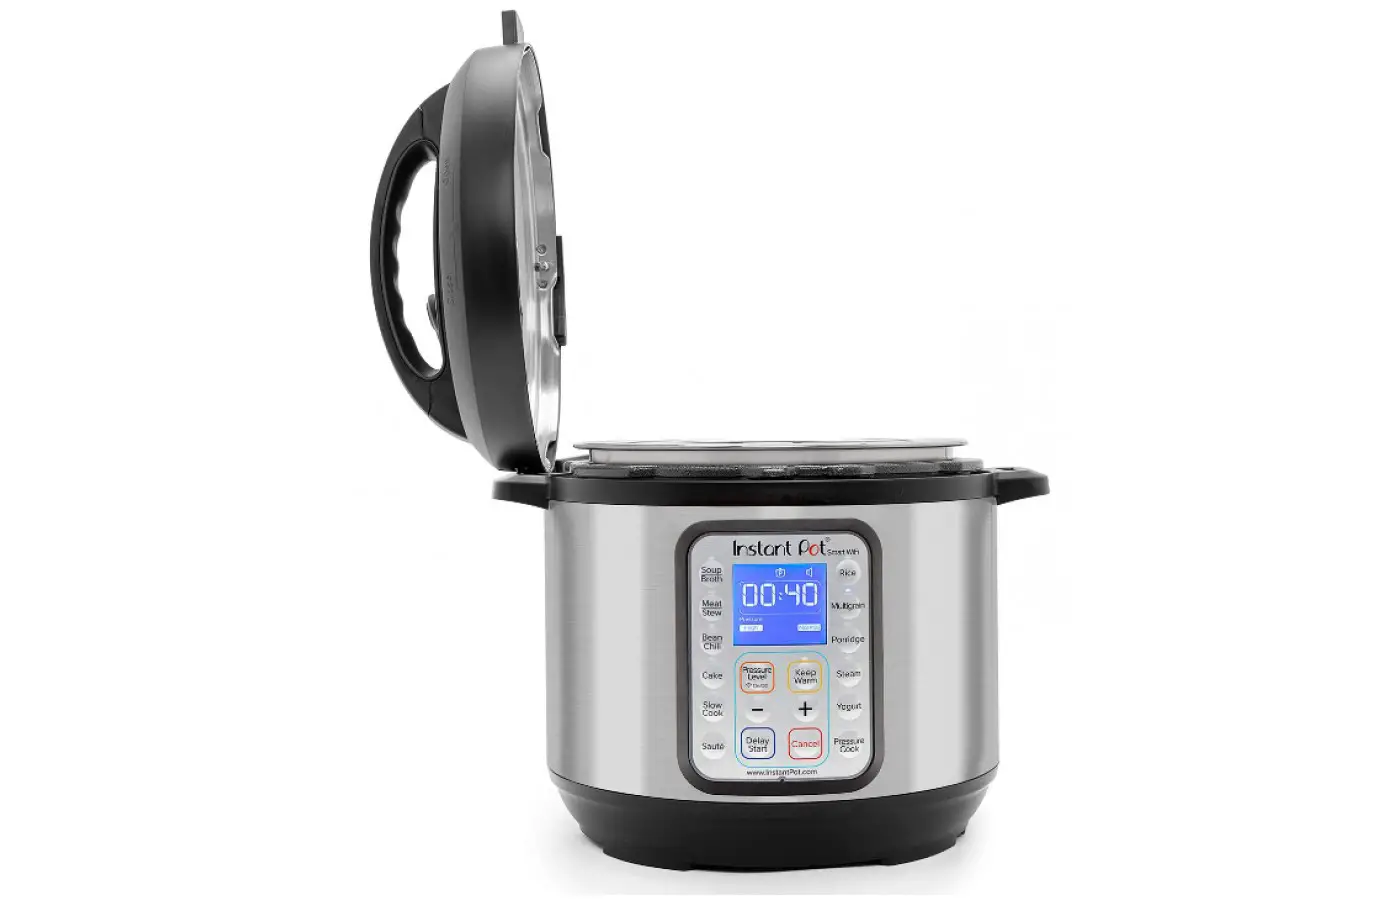 Offering a full 6 quart size to cook in, you can easily prepare an entire family meal.